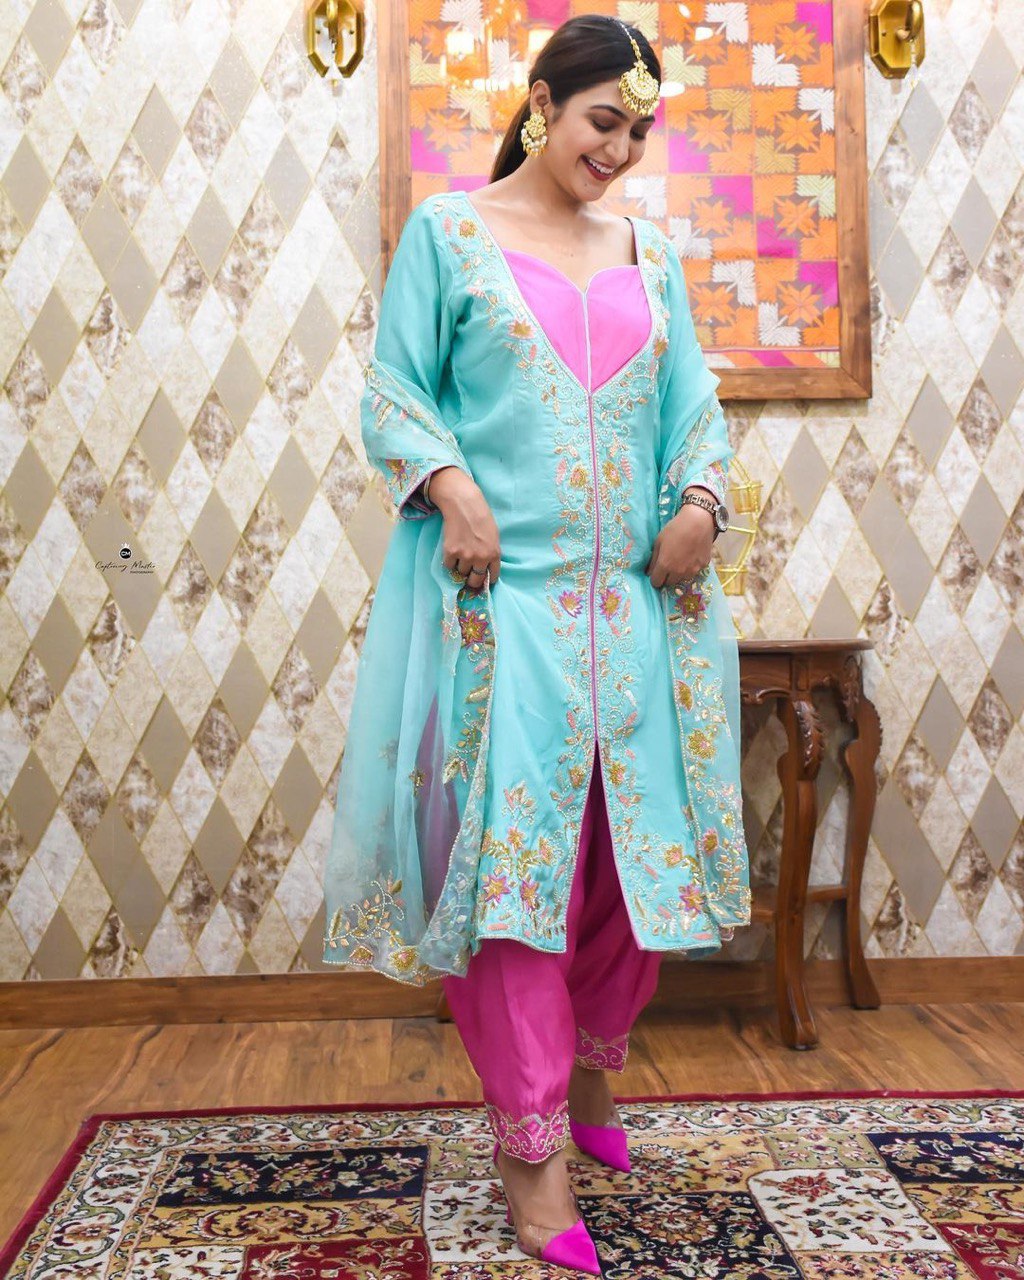 MAYTAFASHION Georgette Embroidered Salwar Suit Material Price in India -  Buy MAYTAFASHION Georgette Embroidered Salwar Suit Material online at  Flipkart.com